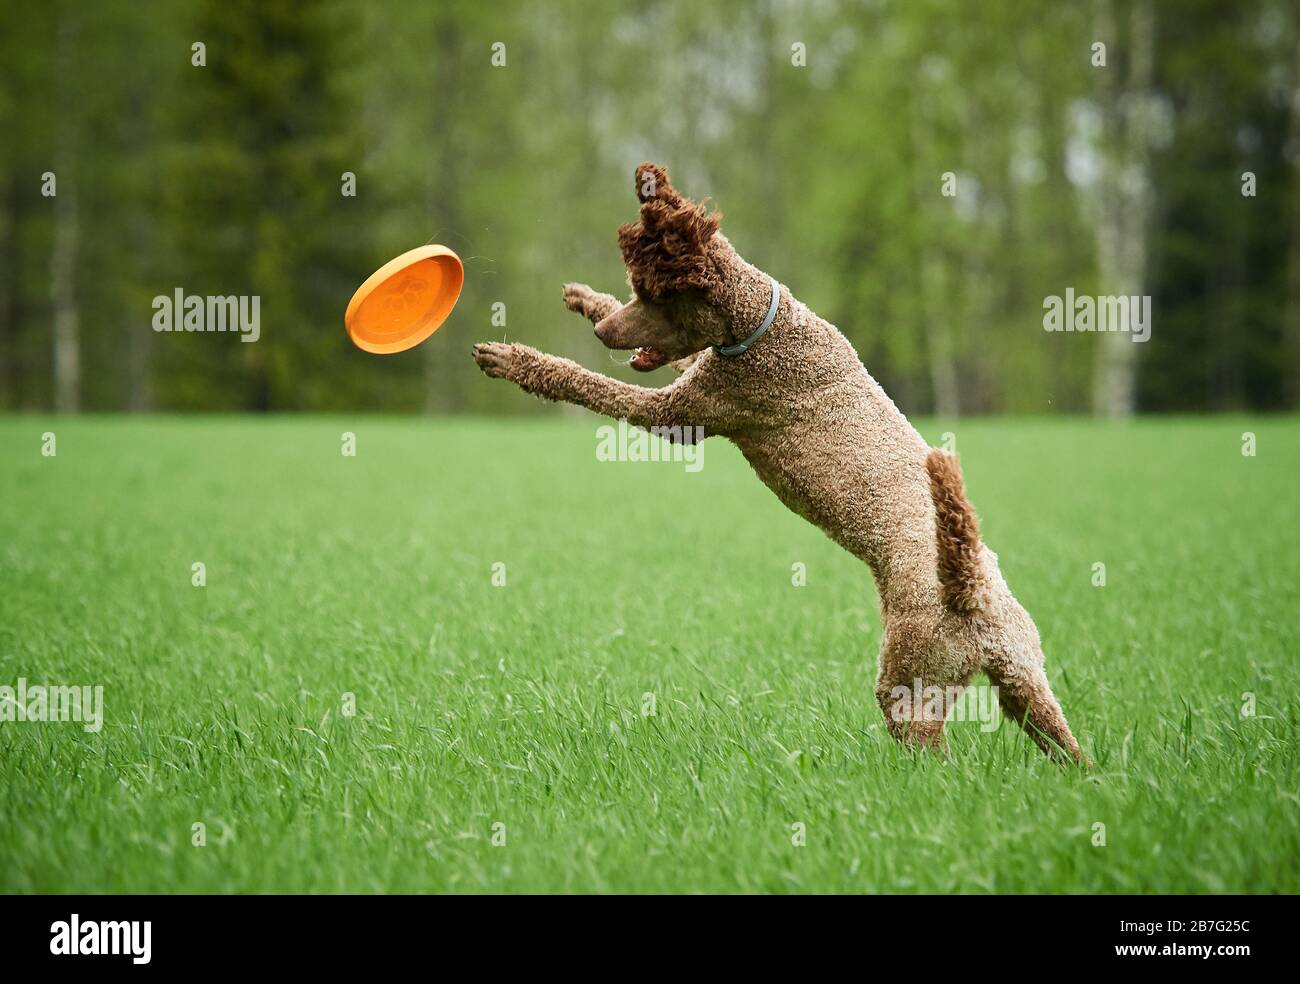 Brown standard poodle running and jumping joyfully in a meadow. Playful dog playing with a toy in the grass in summer. Stock Photo